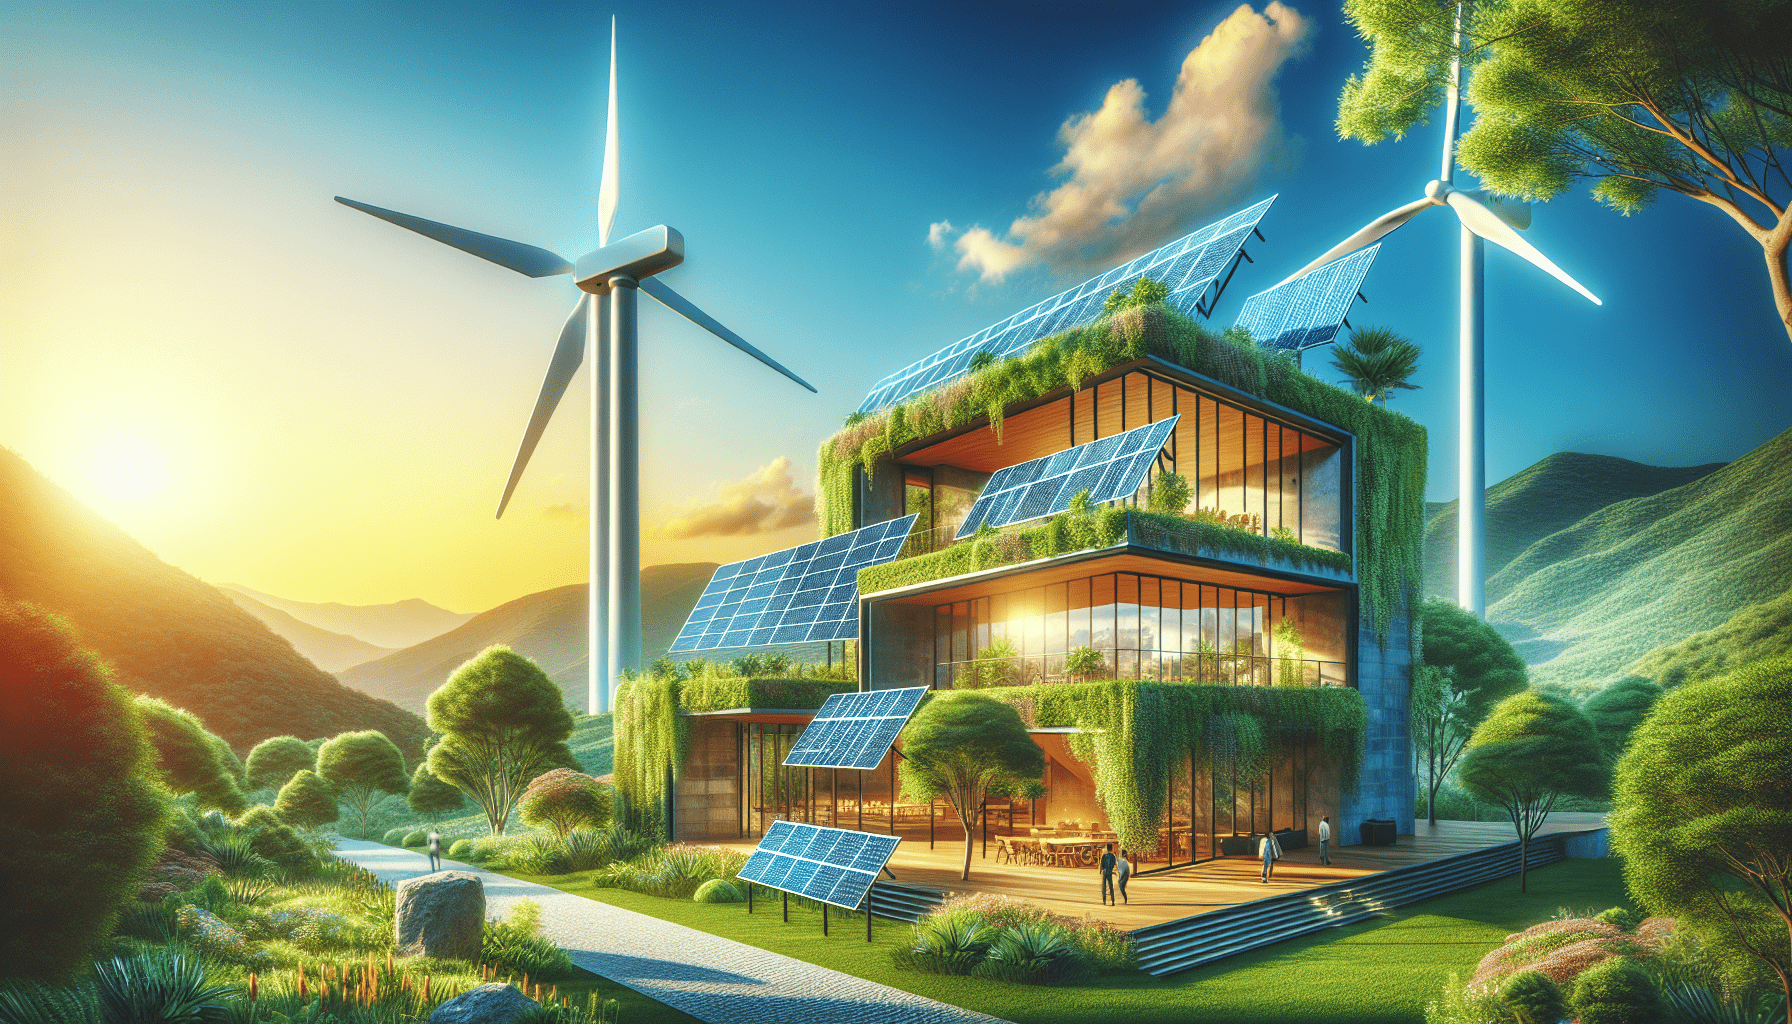 How Do You Integrate Renewable Energy Systems Into Sustainable Buildings?